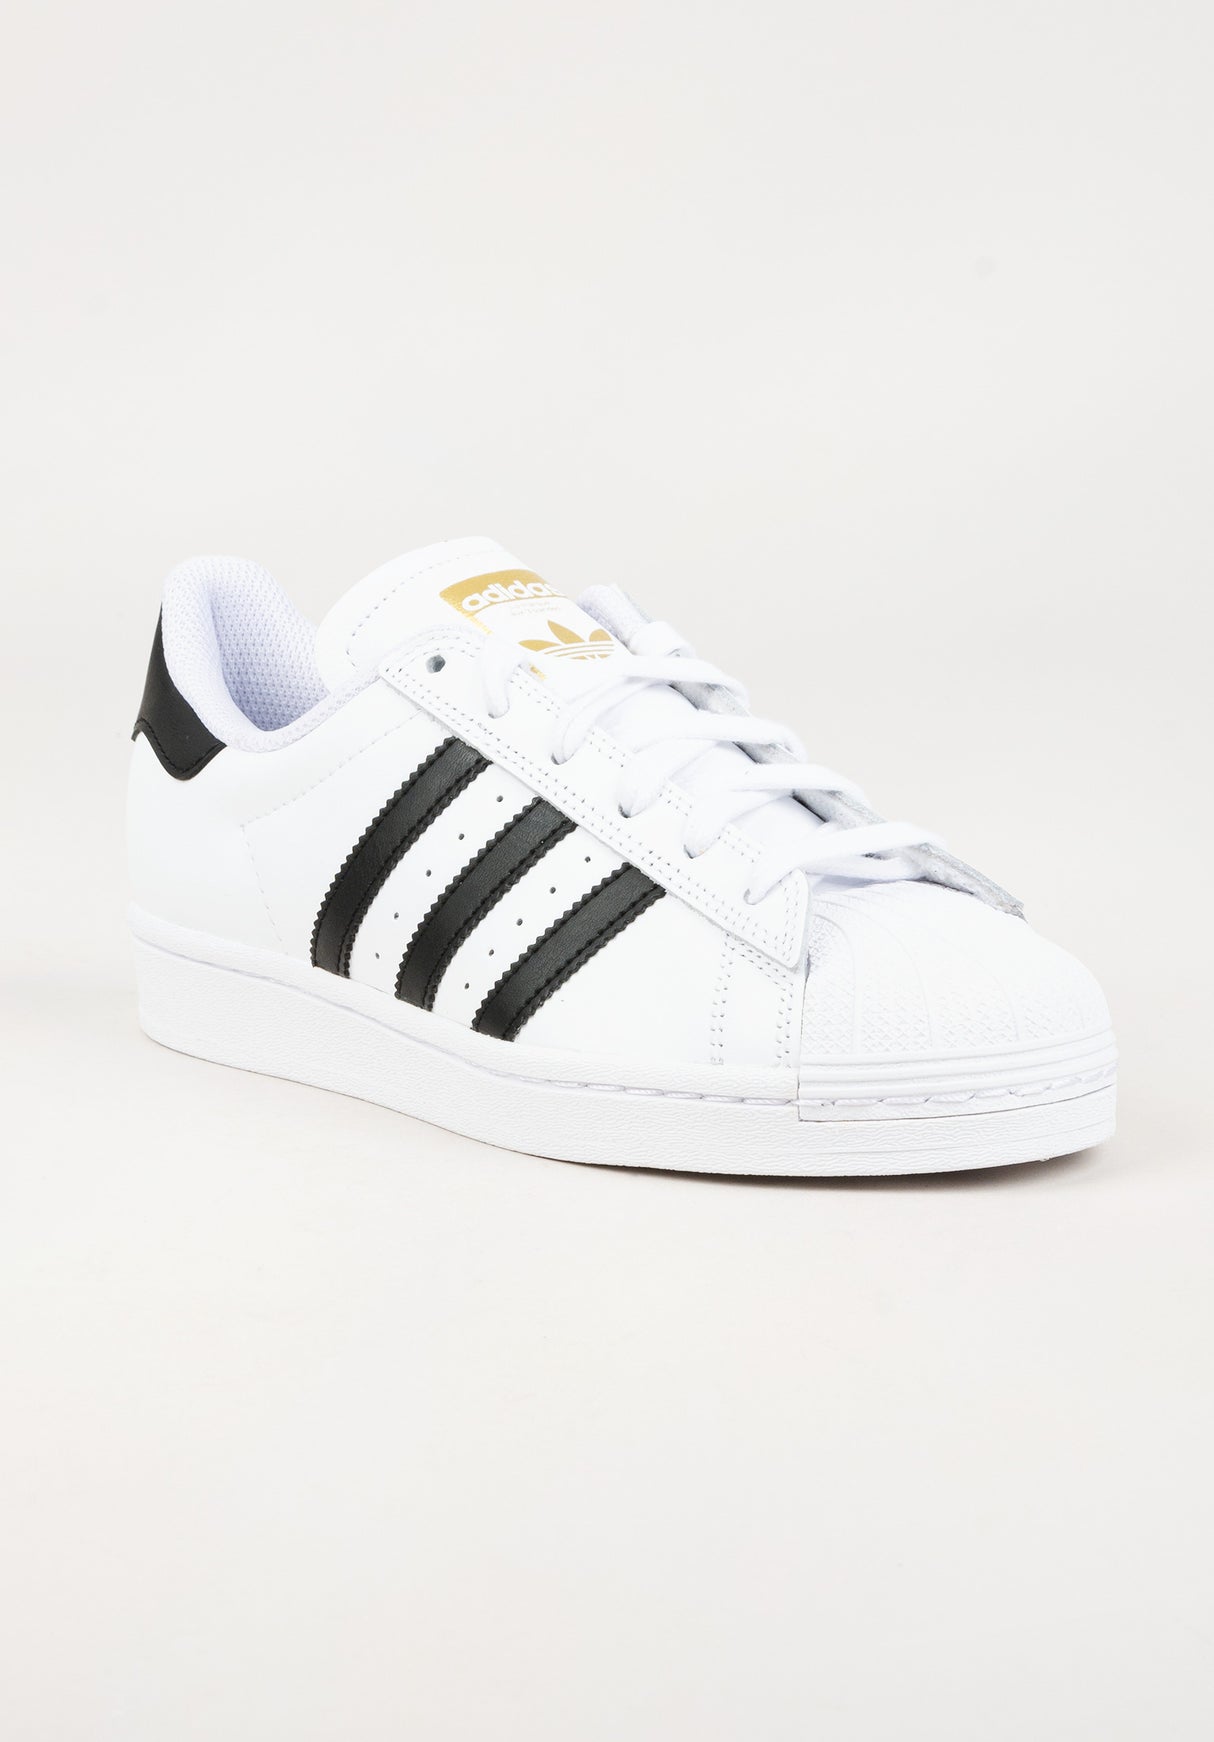 Superstar ADV adidas Womens Shoes in white-coreblack-gold for Women – TITUS